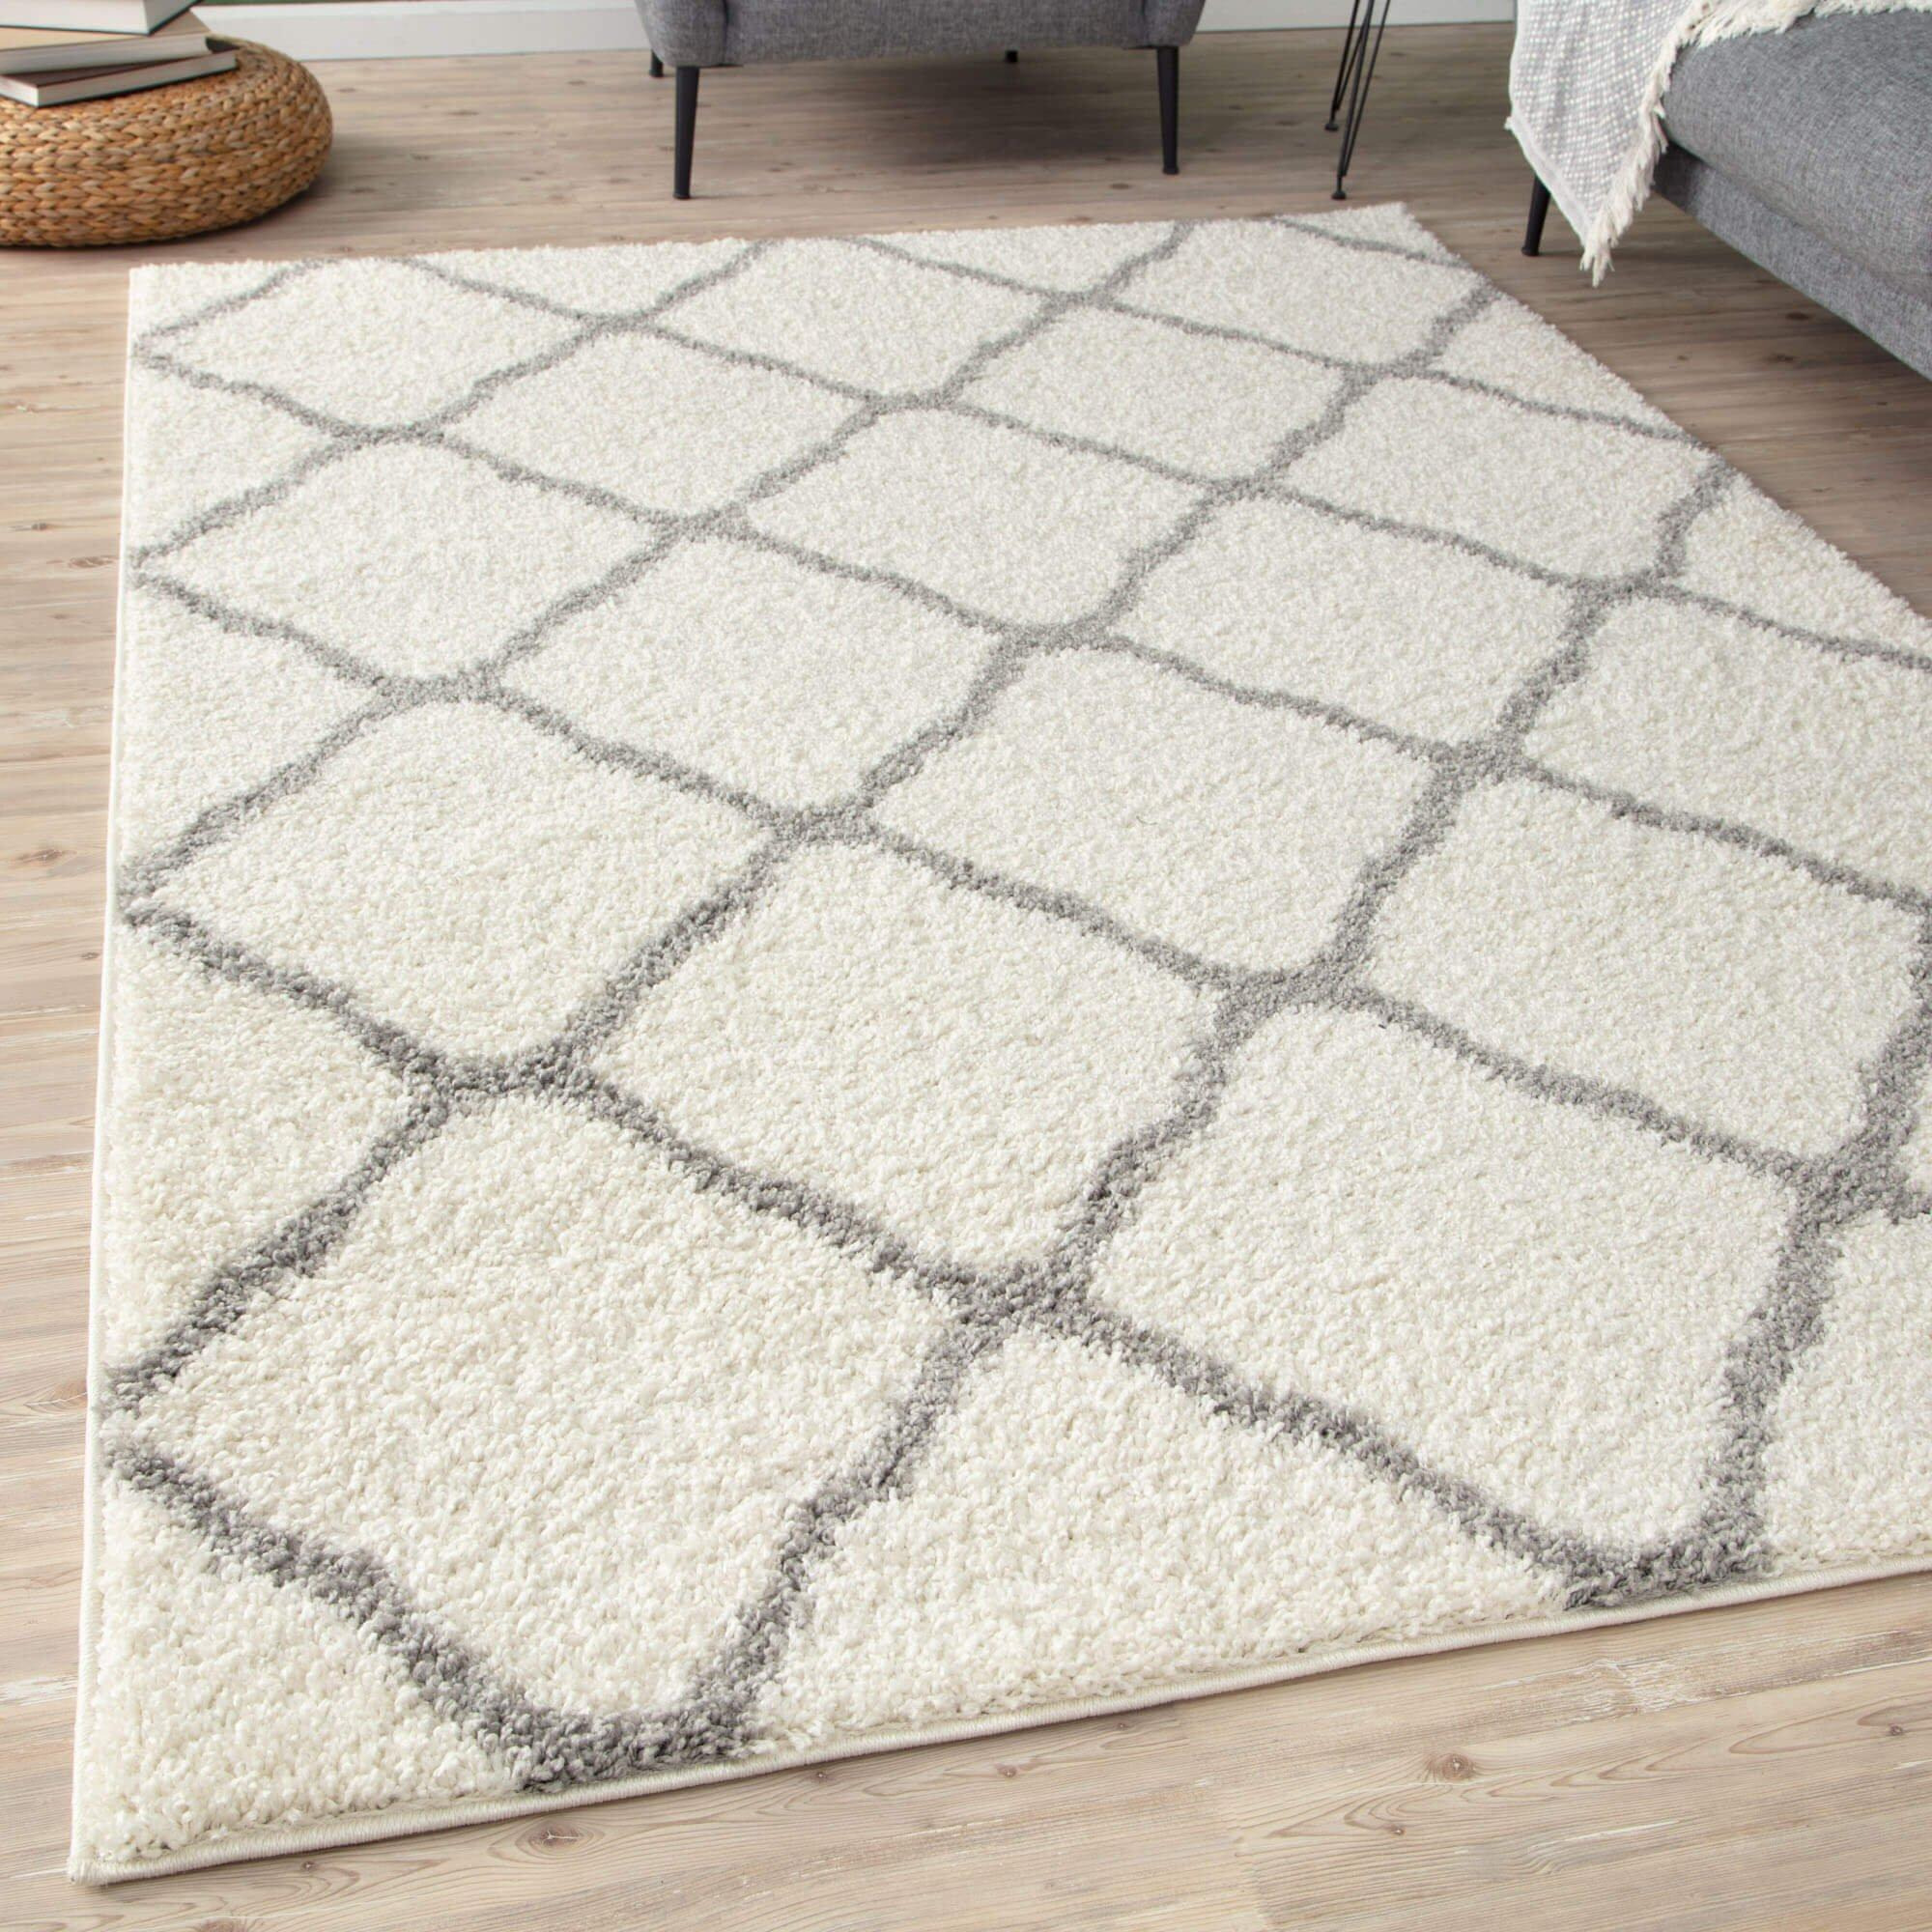 Myshaggy Collection Rugs Moroccan Design in Ivory- 385 IG - image 1